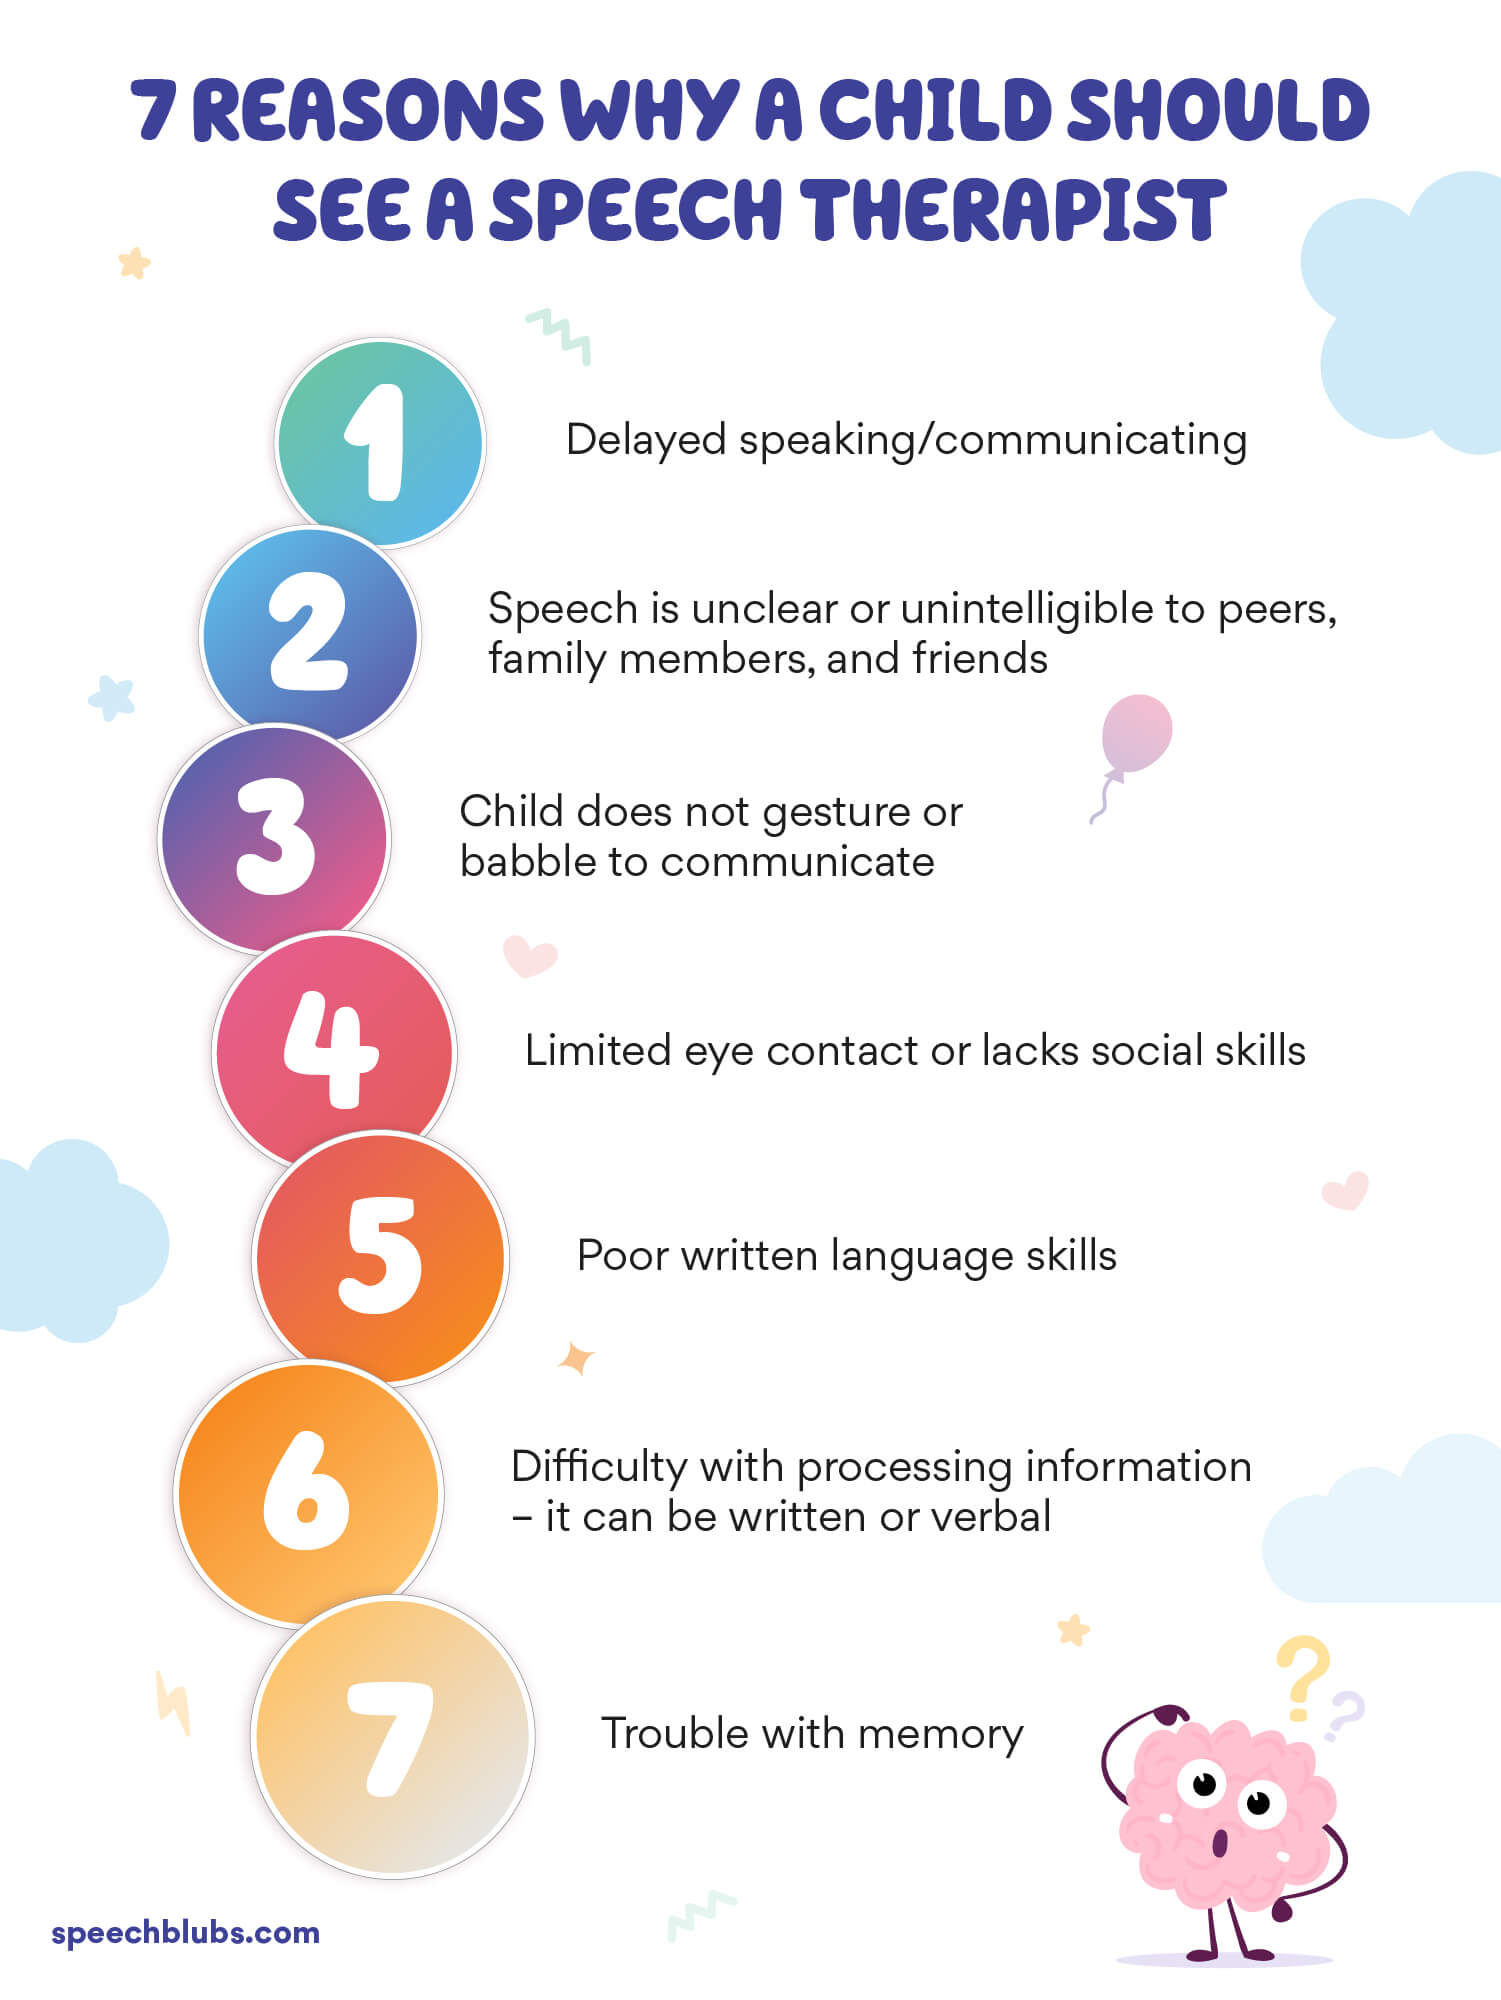 teaching articles speech therapy